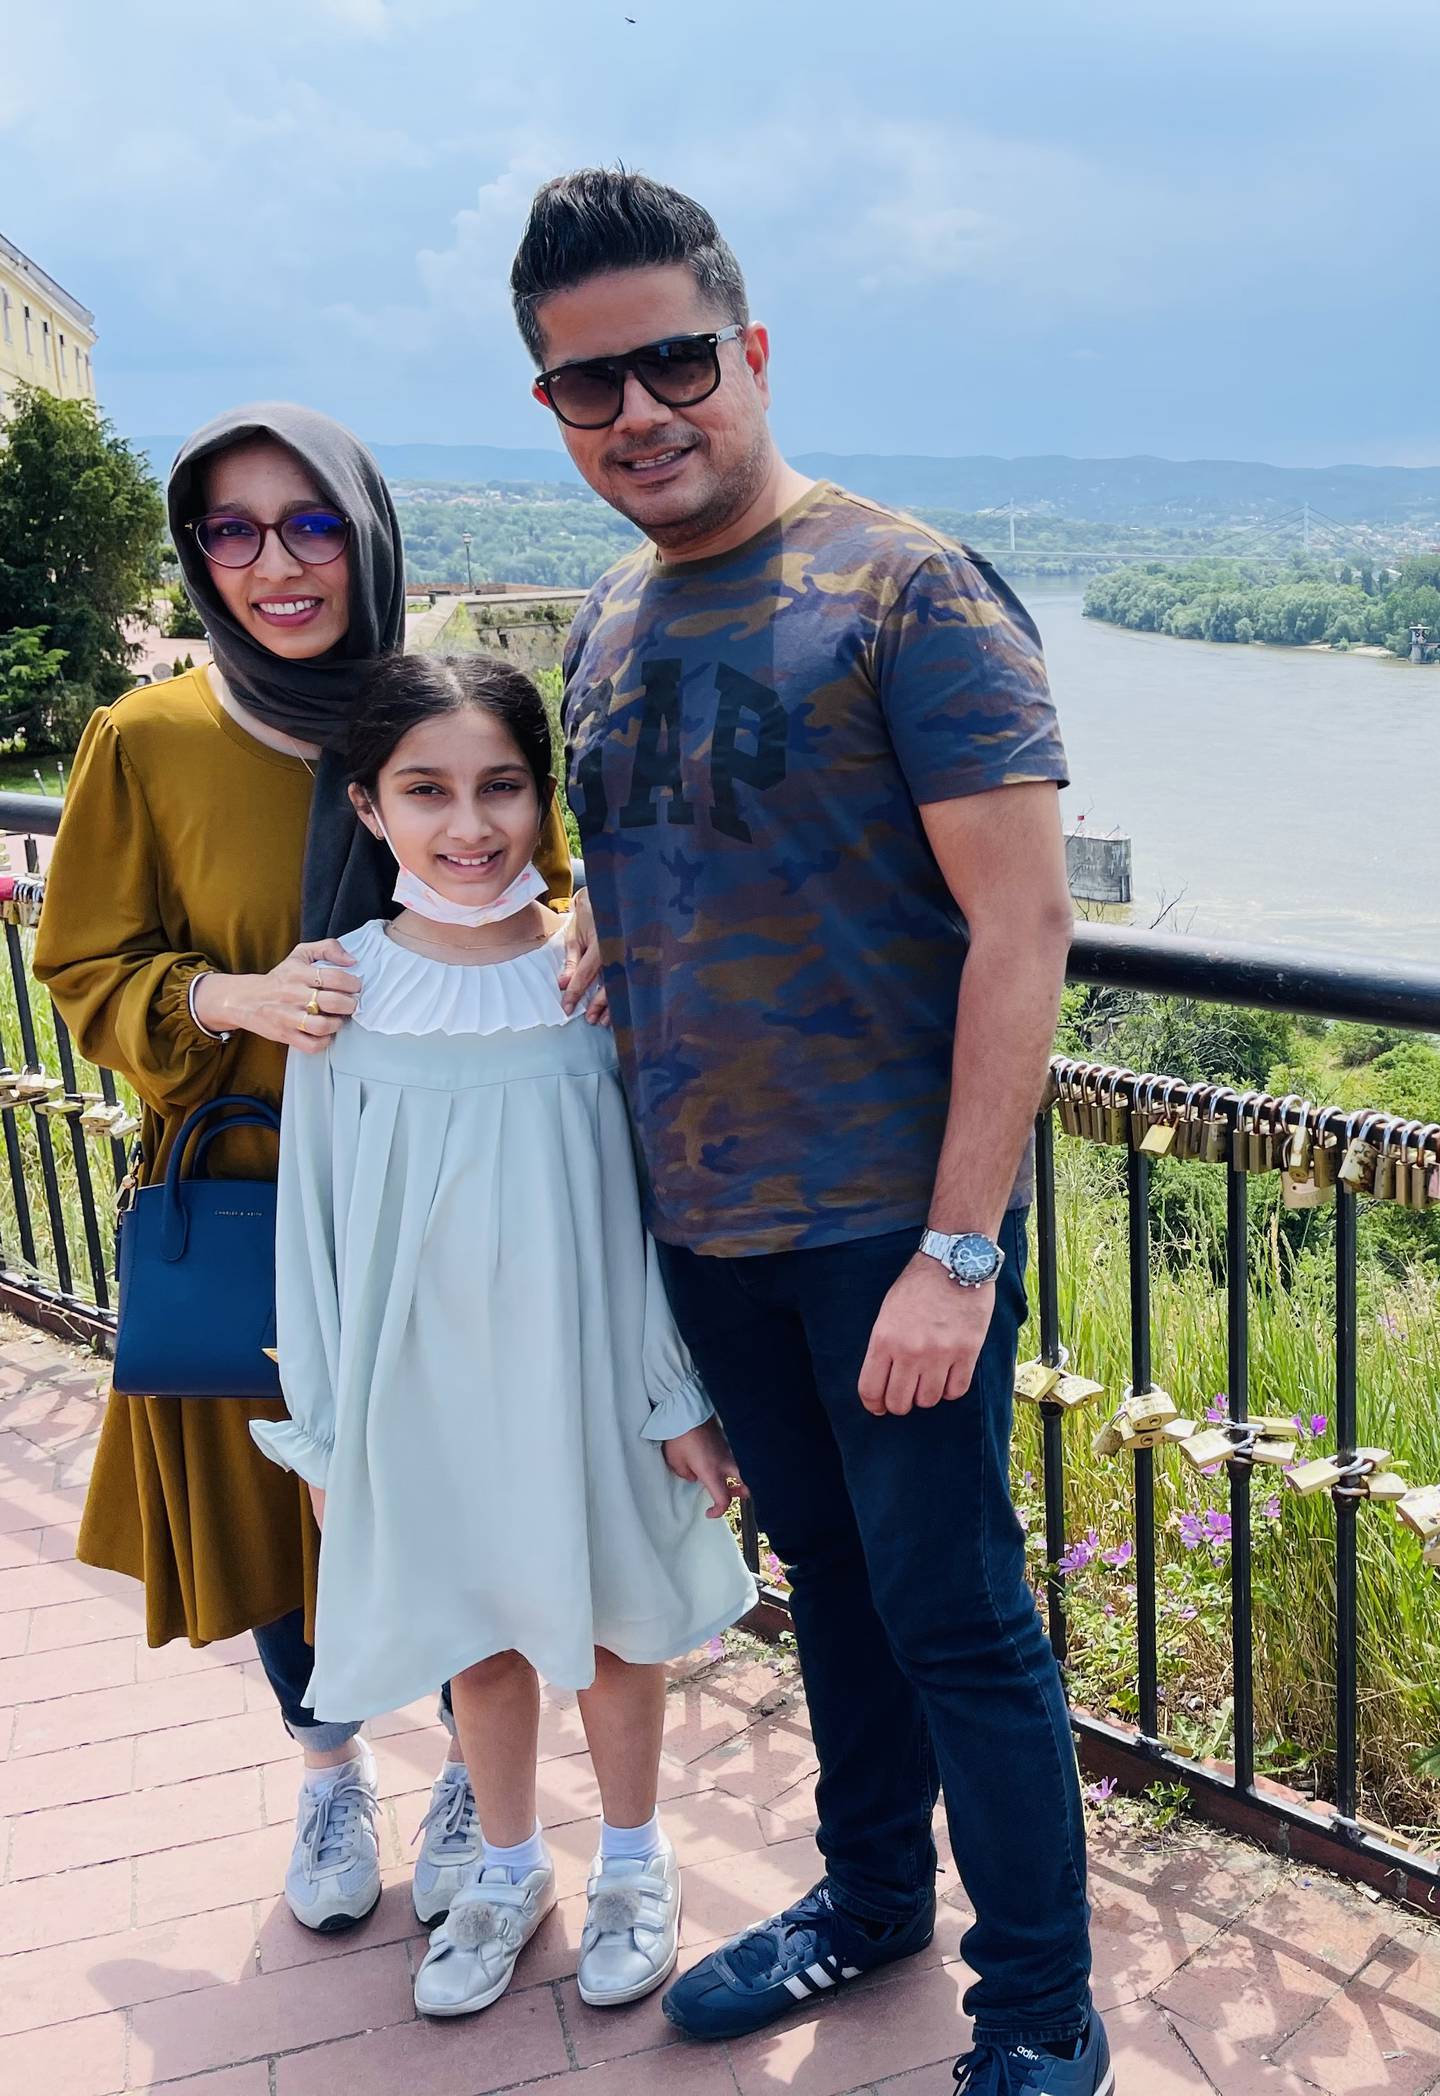 Dubai resident Fouad Ashraf with his family in Serbia before returning to the UAE